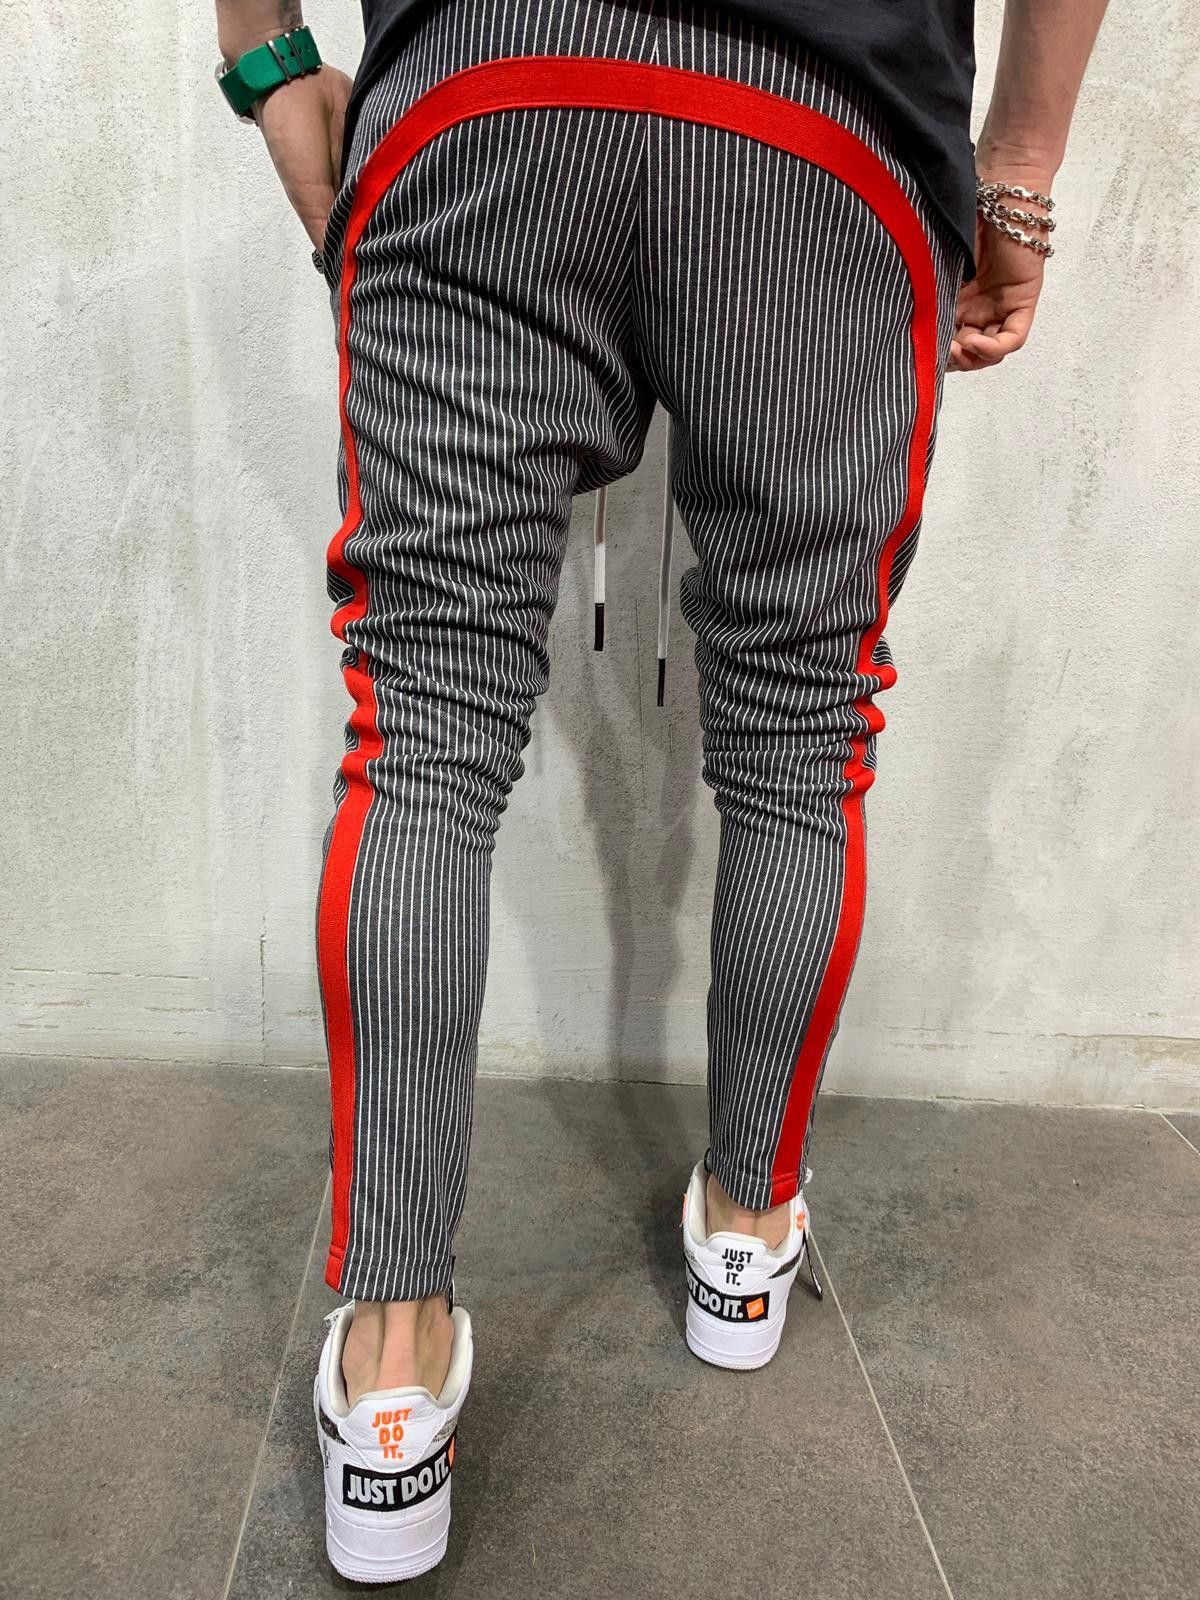 TOP EXPRESSION STRIPED SWEATPANTS RED SIDE STRIPES 4398 for Sale in St ...